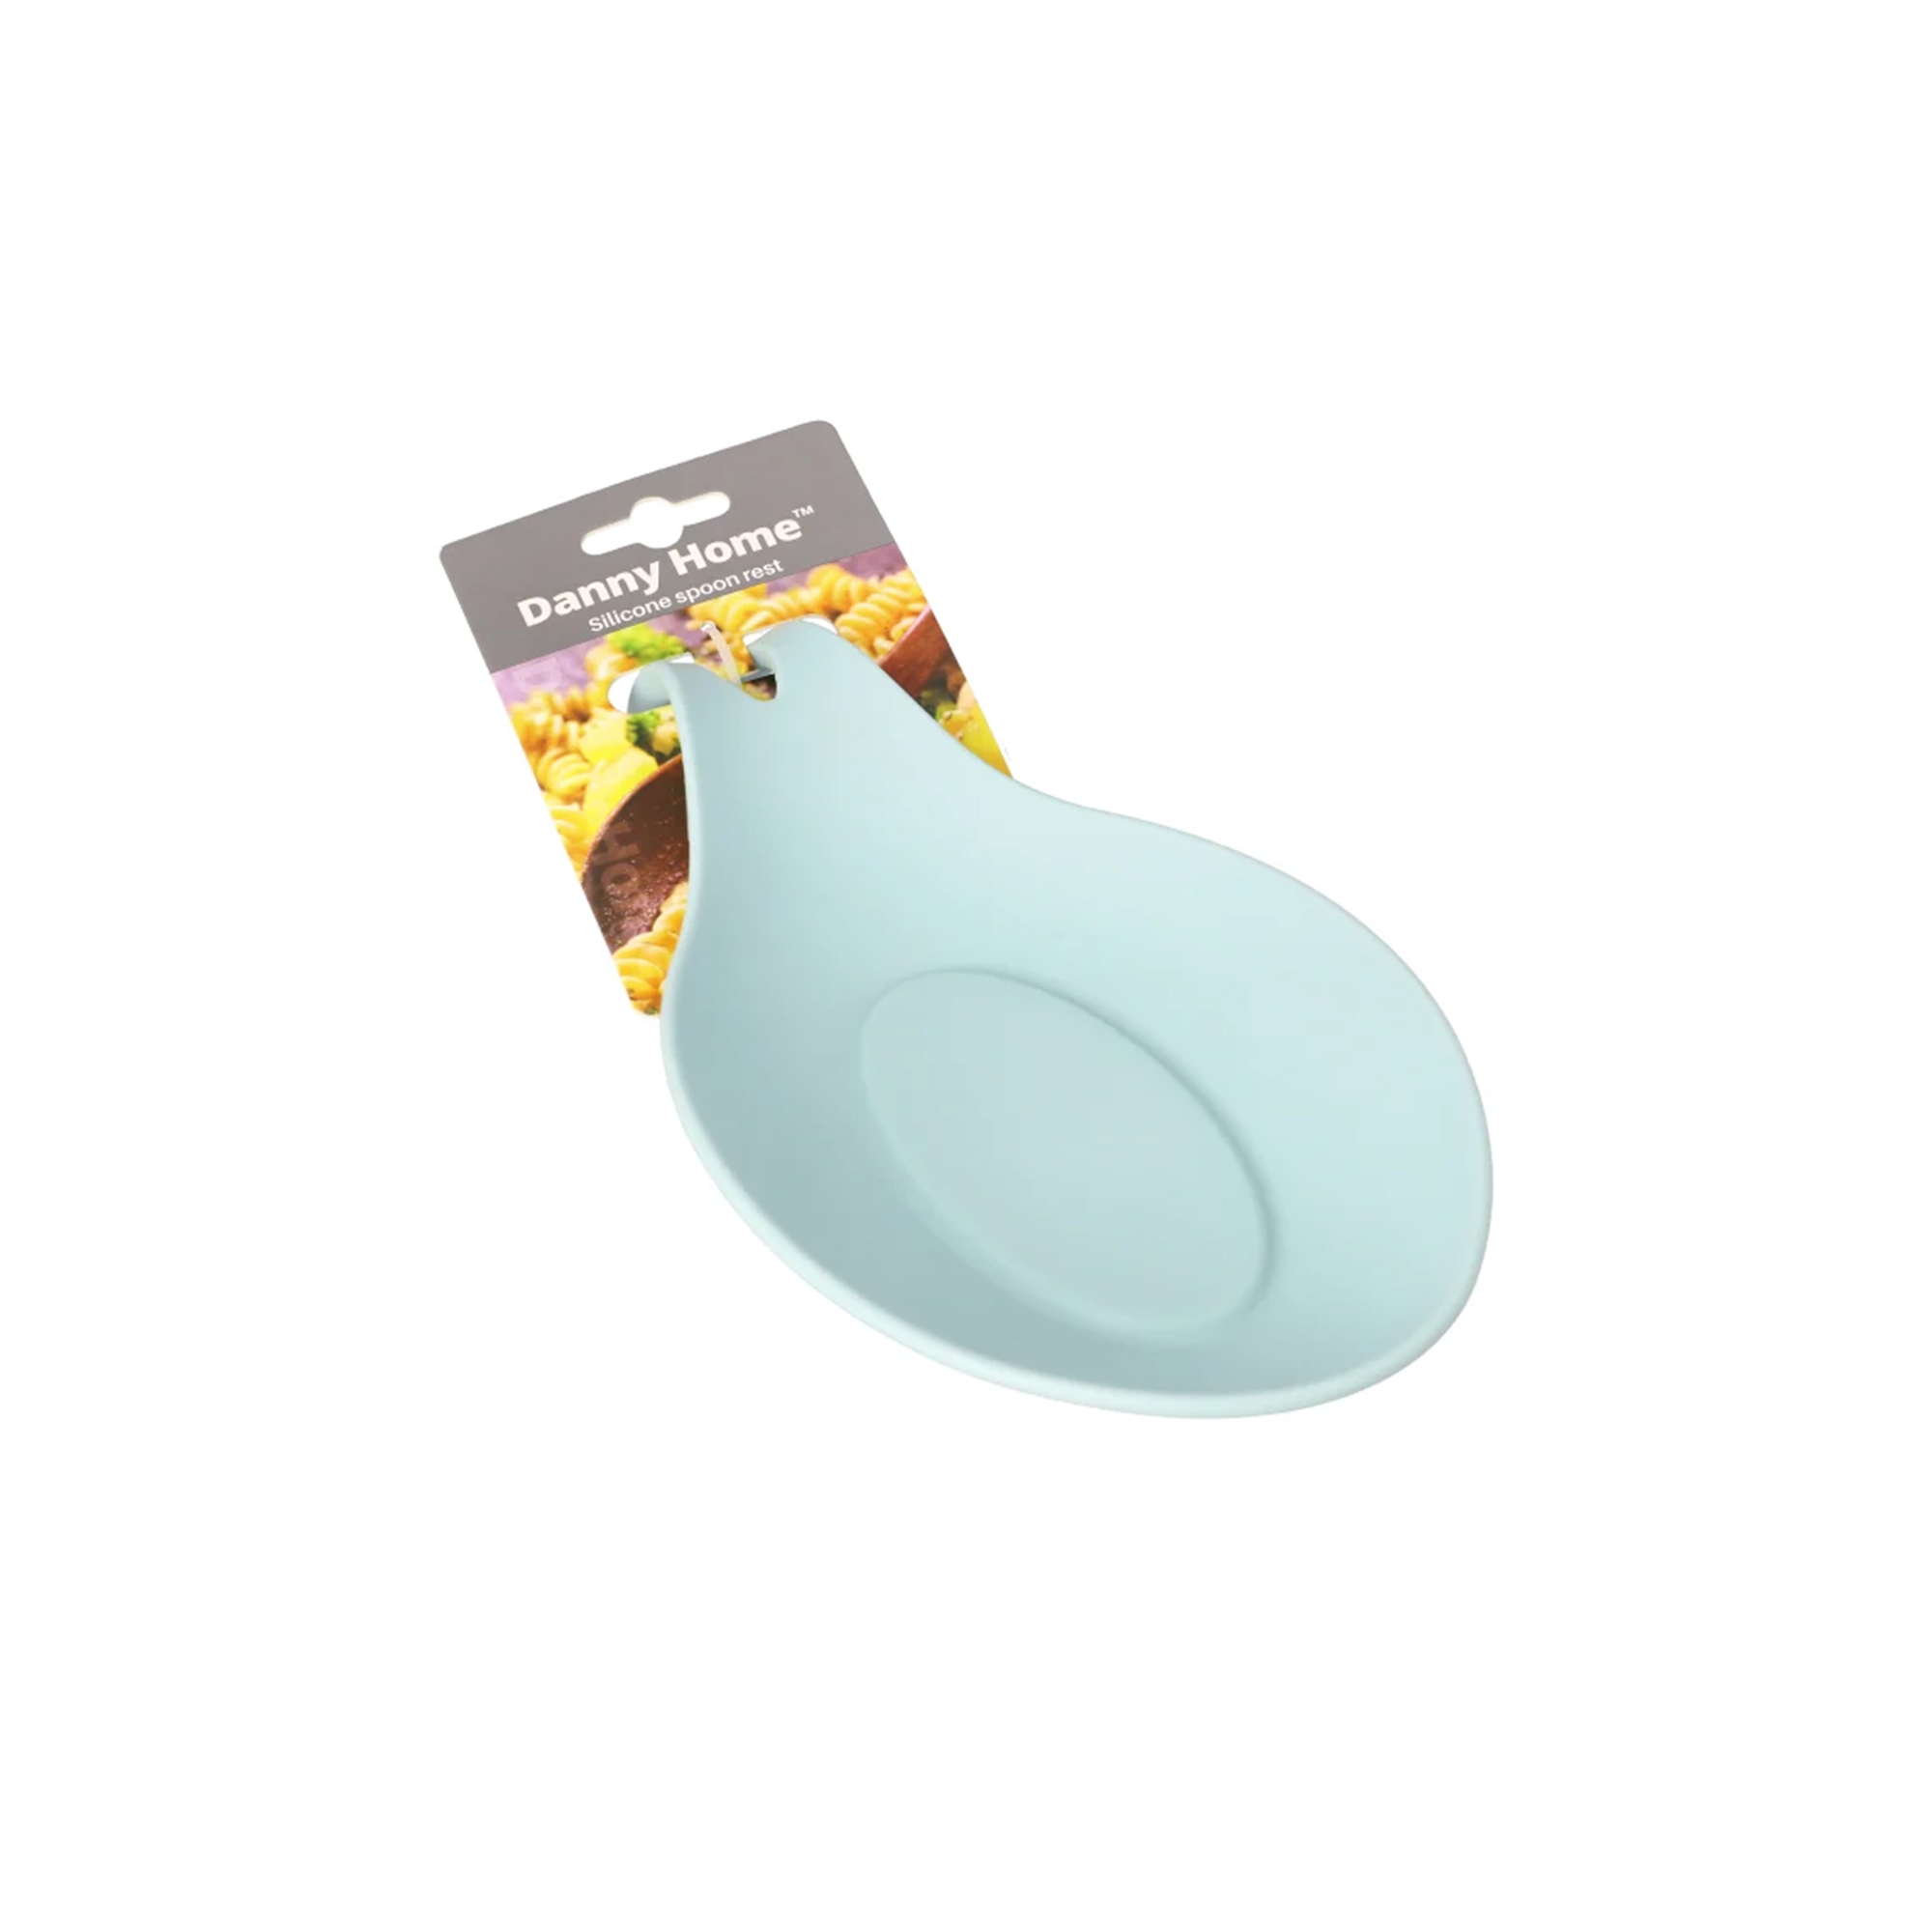 Silicone Spoon Rest Danny Home DH0013